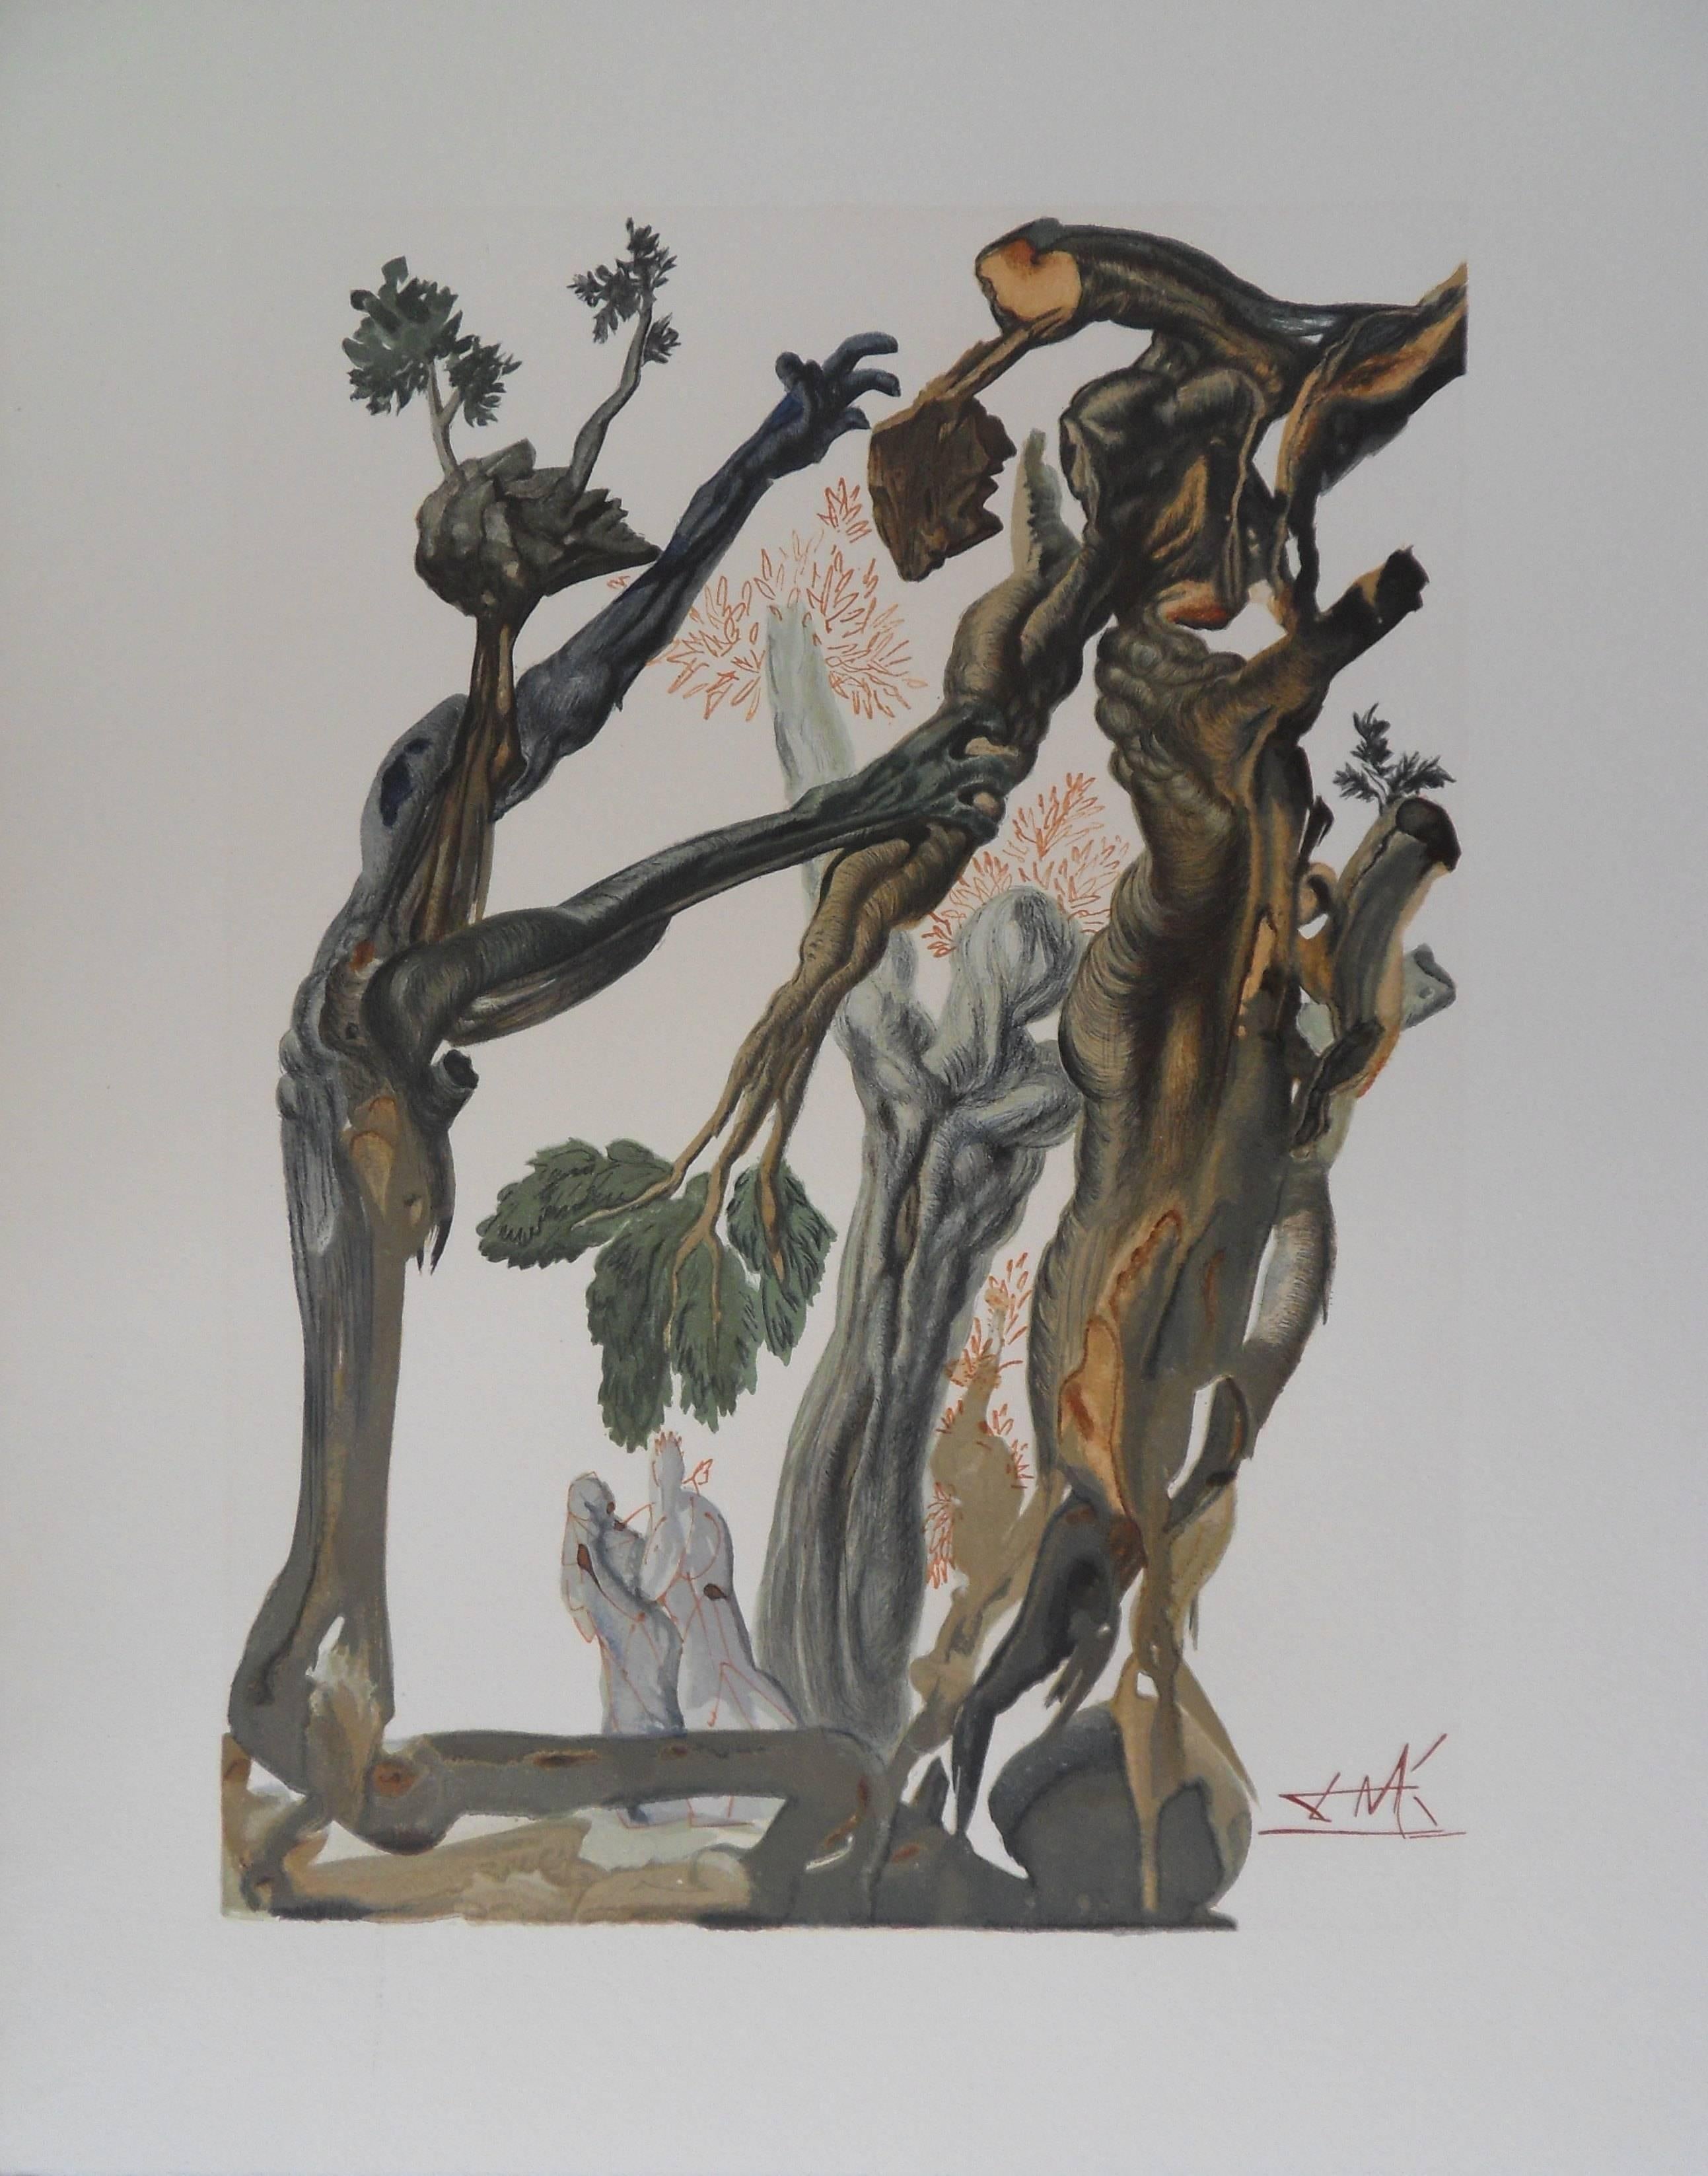 Salvador Dalí Figurative Print - Hell 13 - The Forest of suicides - woodcut - 1963